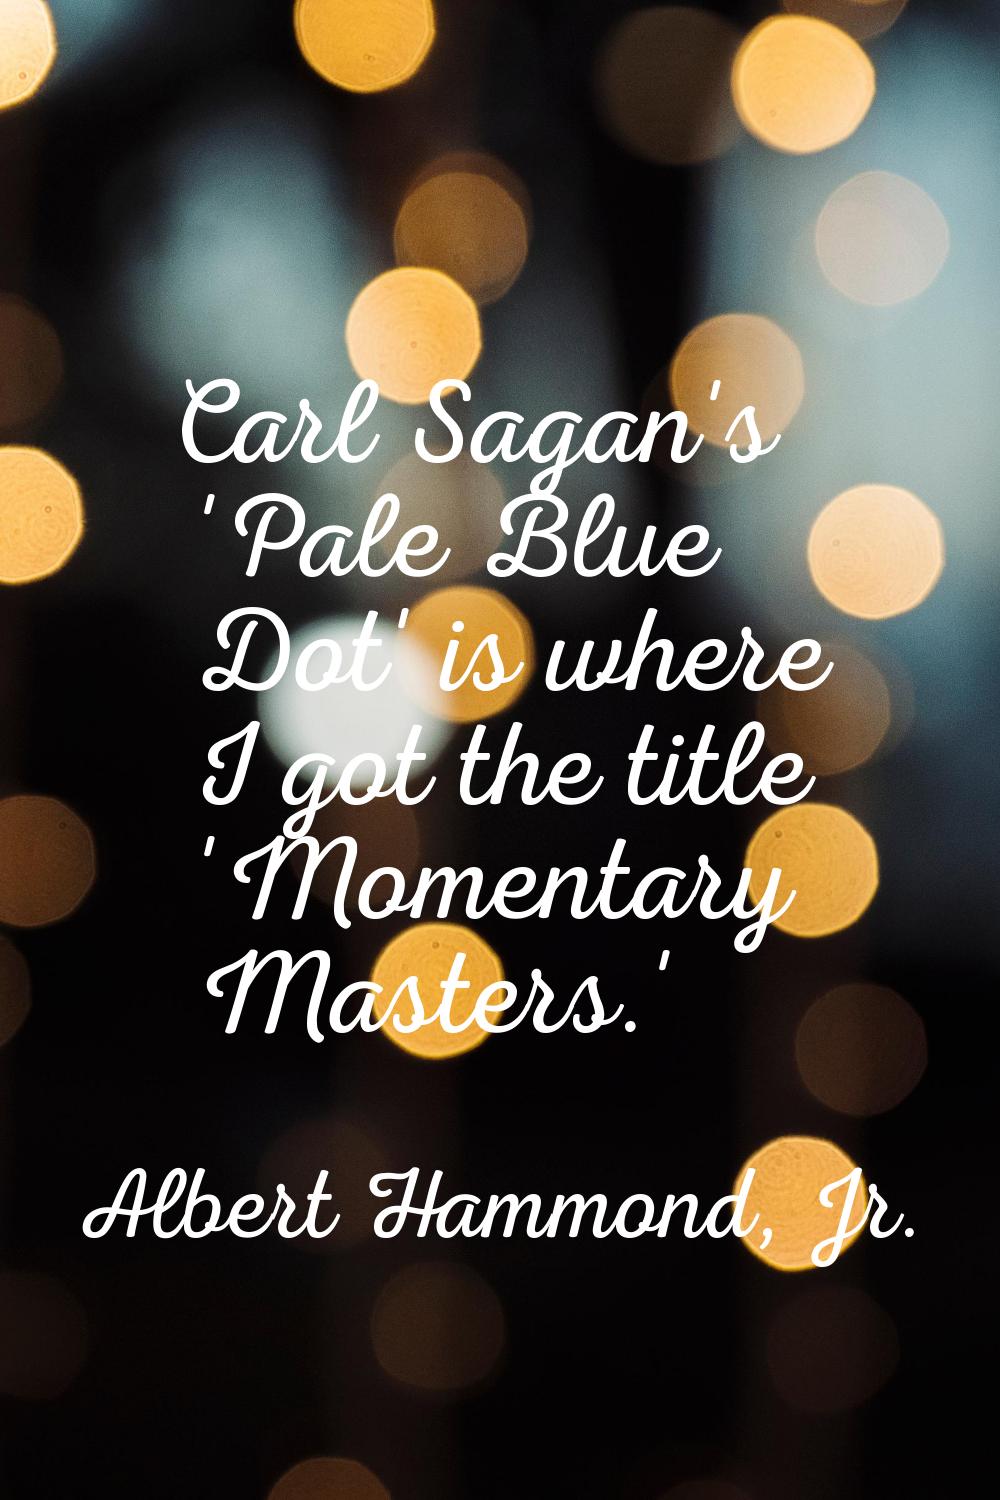 Carl Sagan's 'Pale Blue Dot' is where I got the title 'Momentary Masters.'